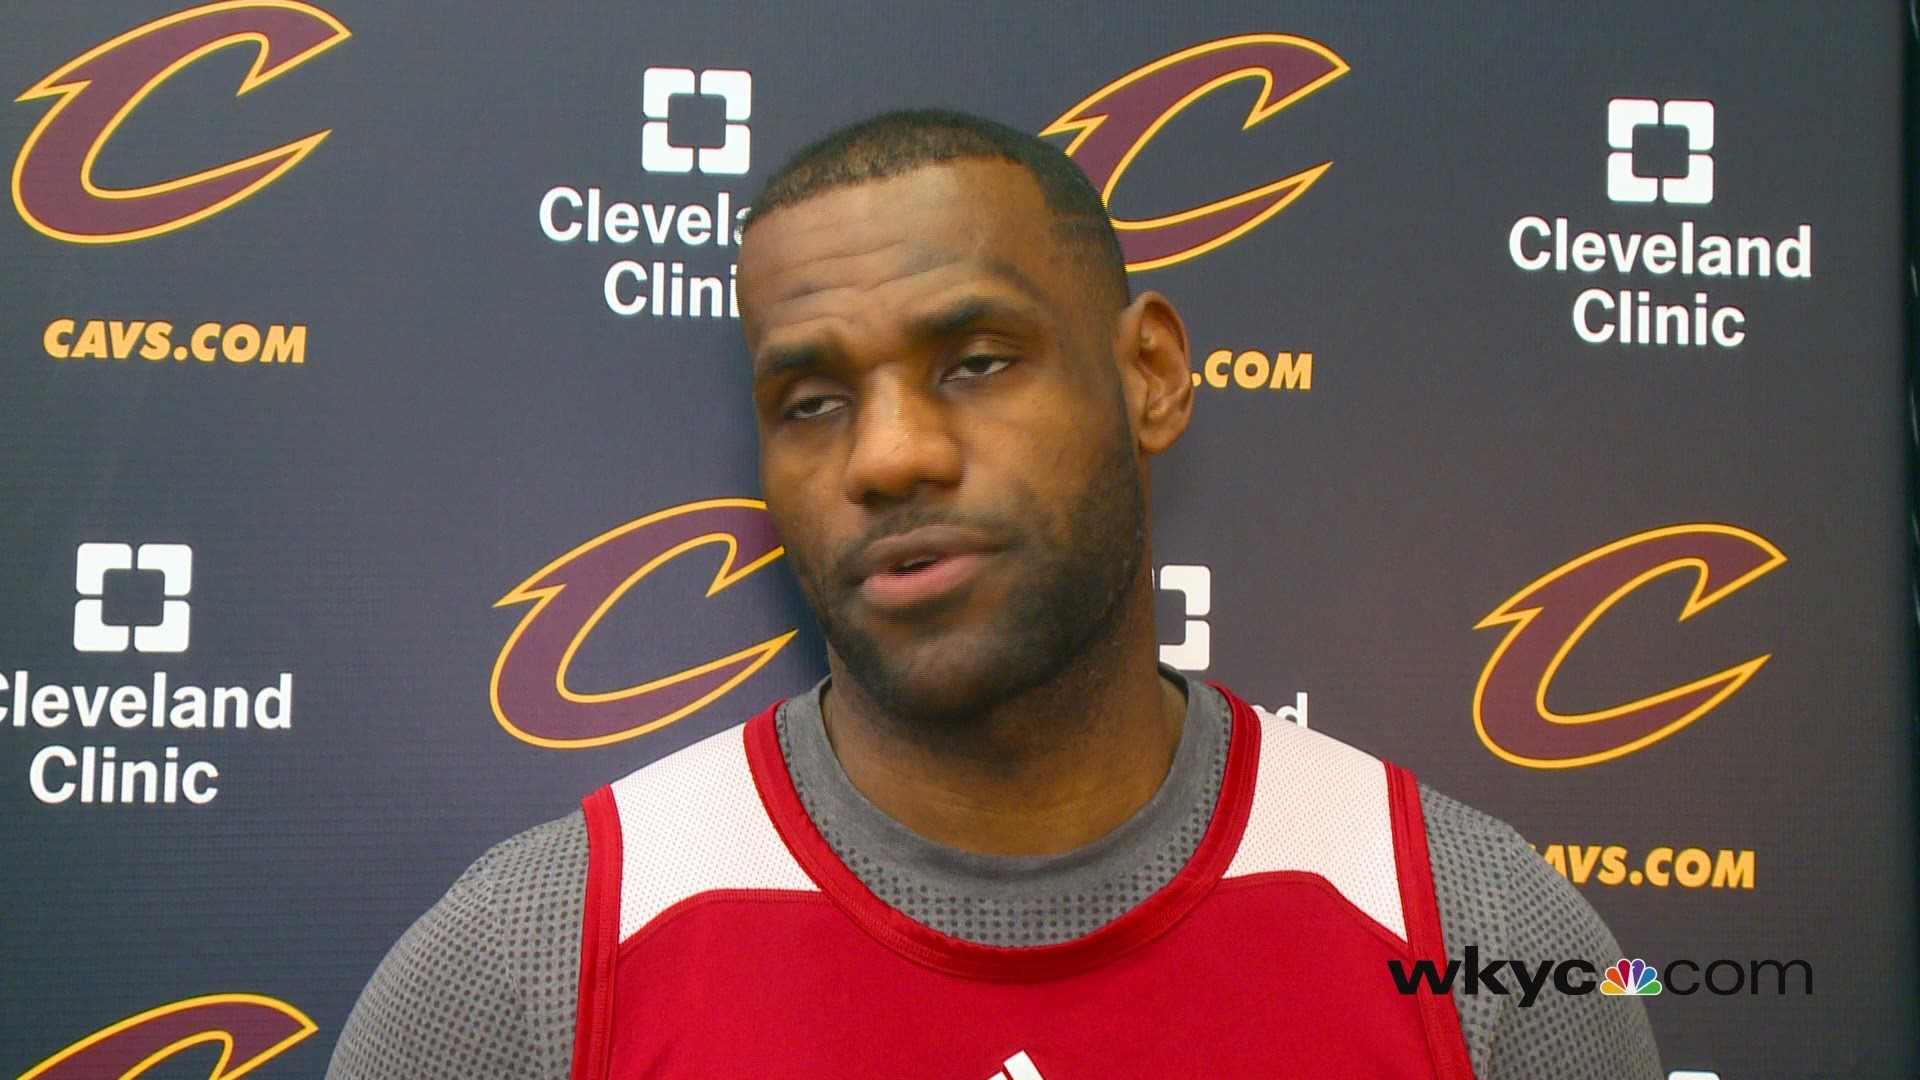 Cleveland Cavalier LeBron James talks about post game interview after a championship game. At the time of this interview LeBron James had not see Cam Newton's post-game press conference but he understands the difficulty in doing them. LeBron James has a 2-4 record in the NBA Finals and has talked after each game.